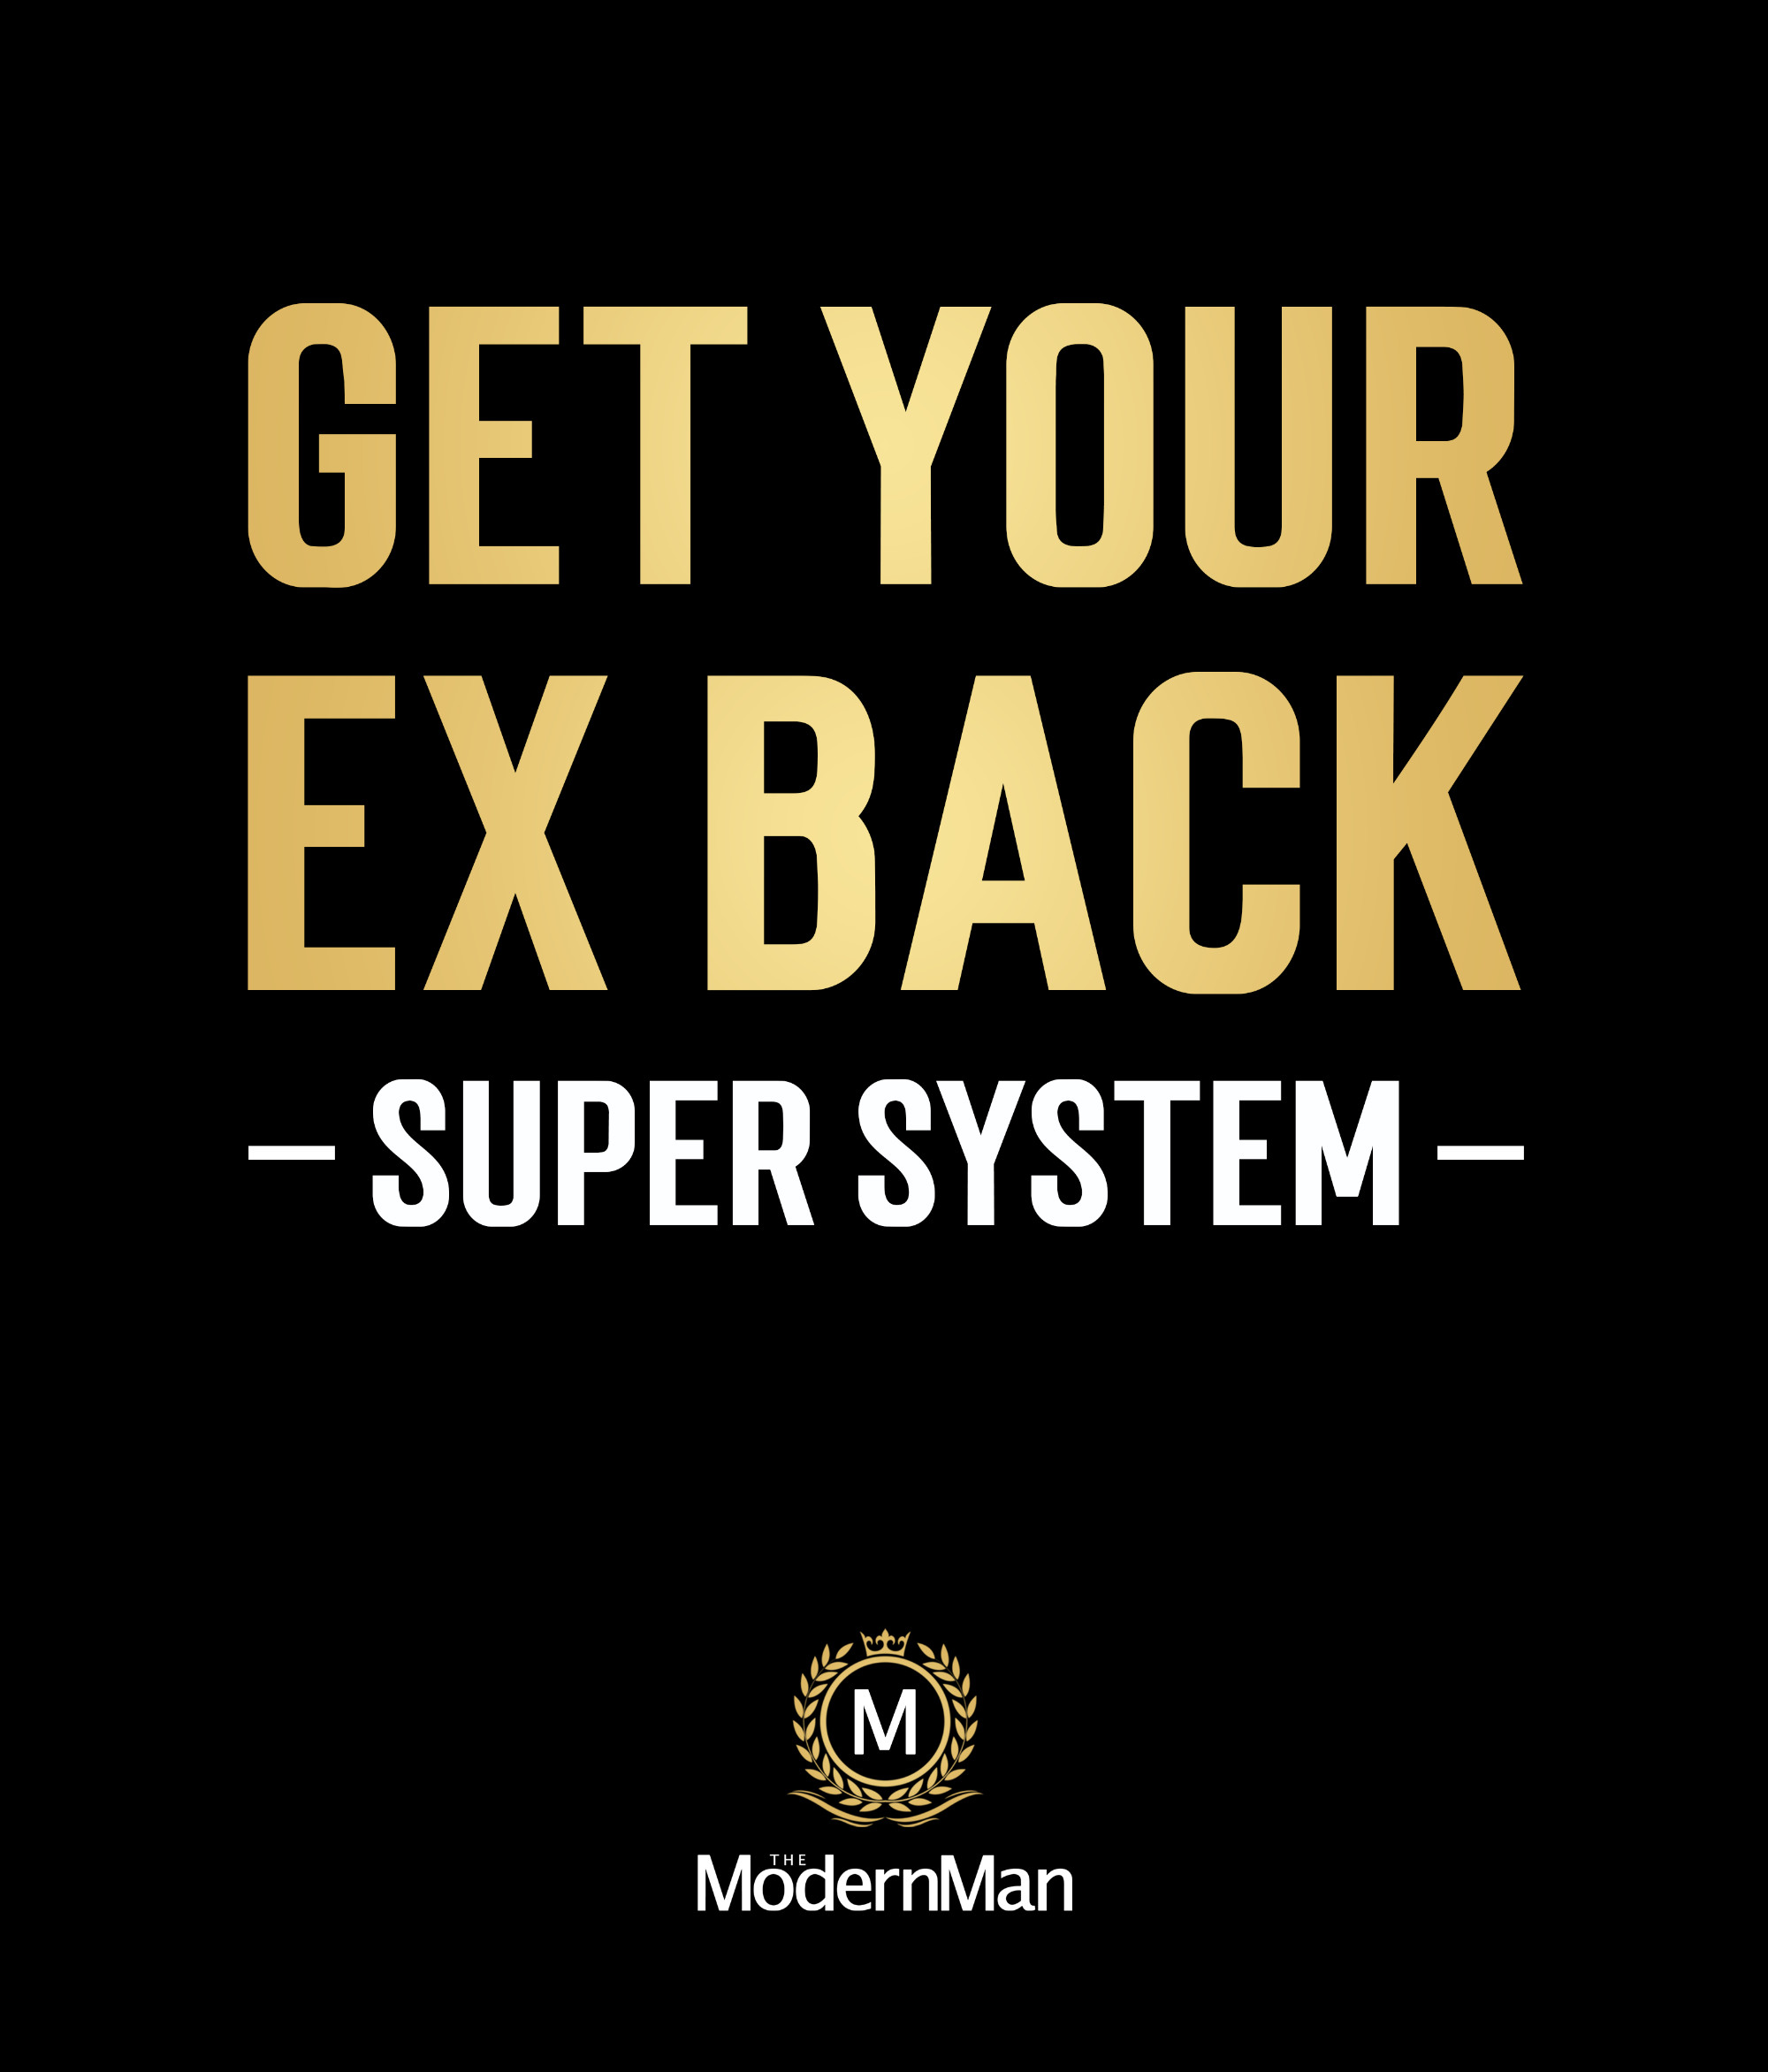 Get Your Ex Back Super System by Dan Bacon - Download or Watch Online now